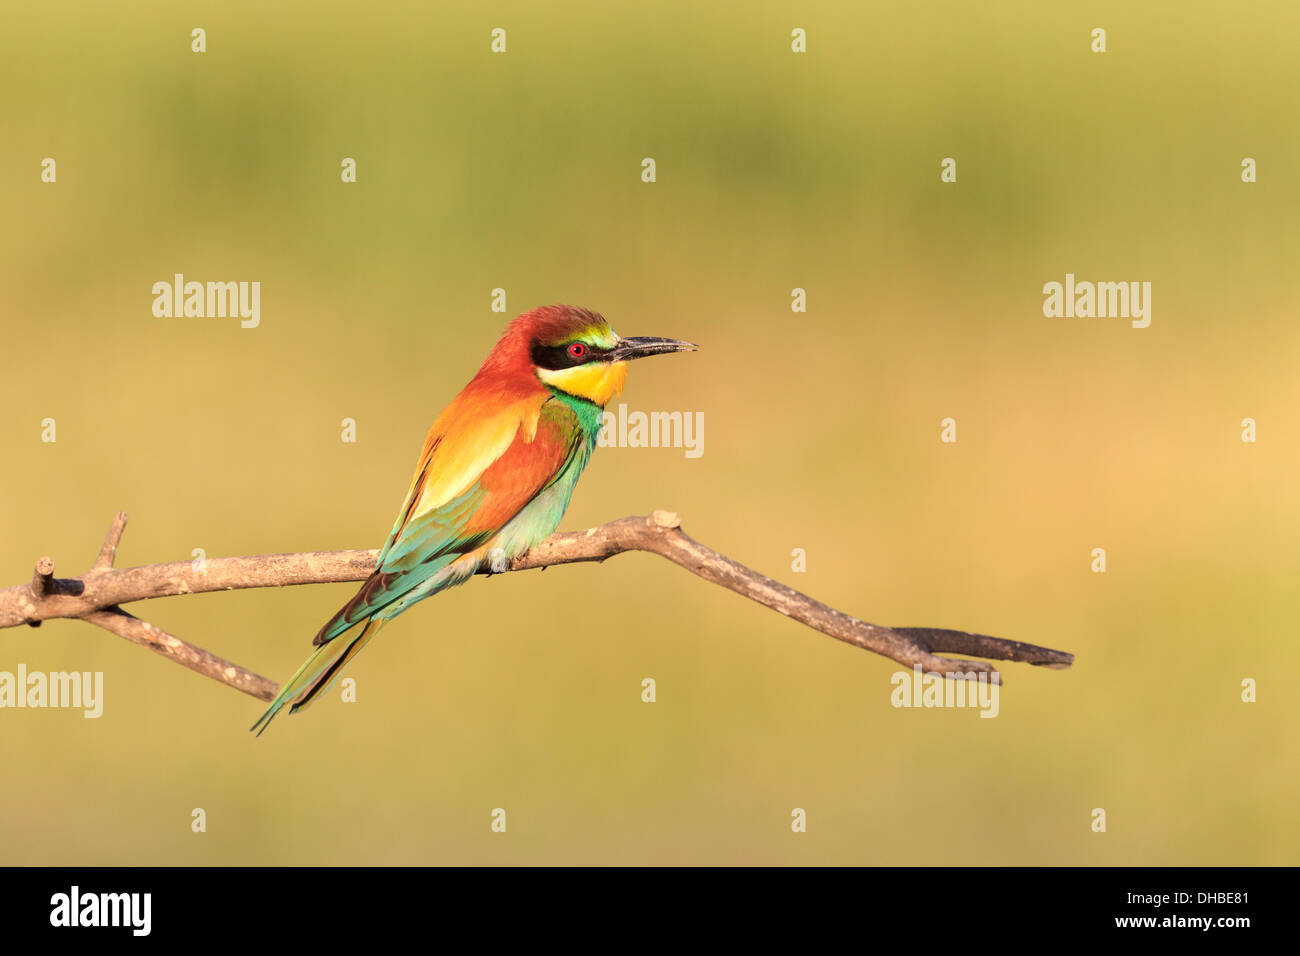 European Bee-eater (Merops apiaster) perched on branch. Lleida. Catalonia. Spain. Stock Photo